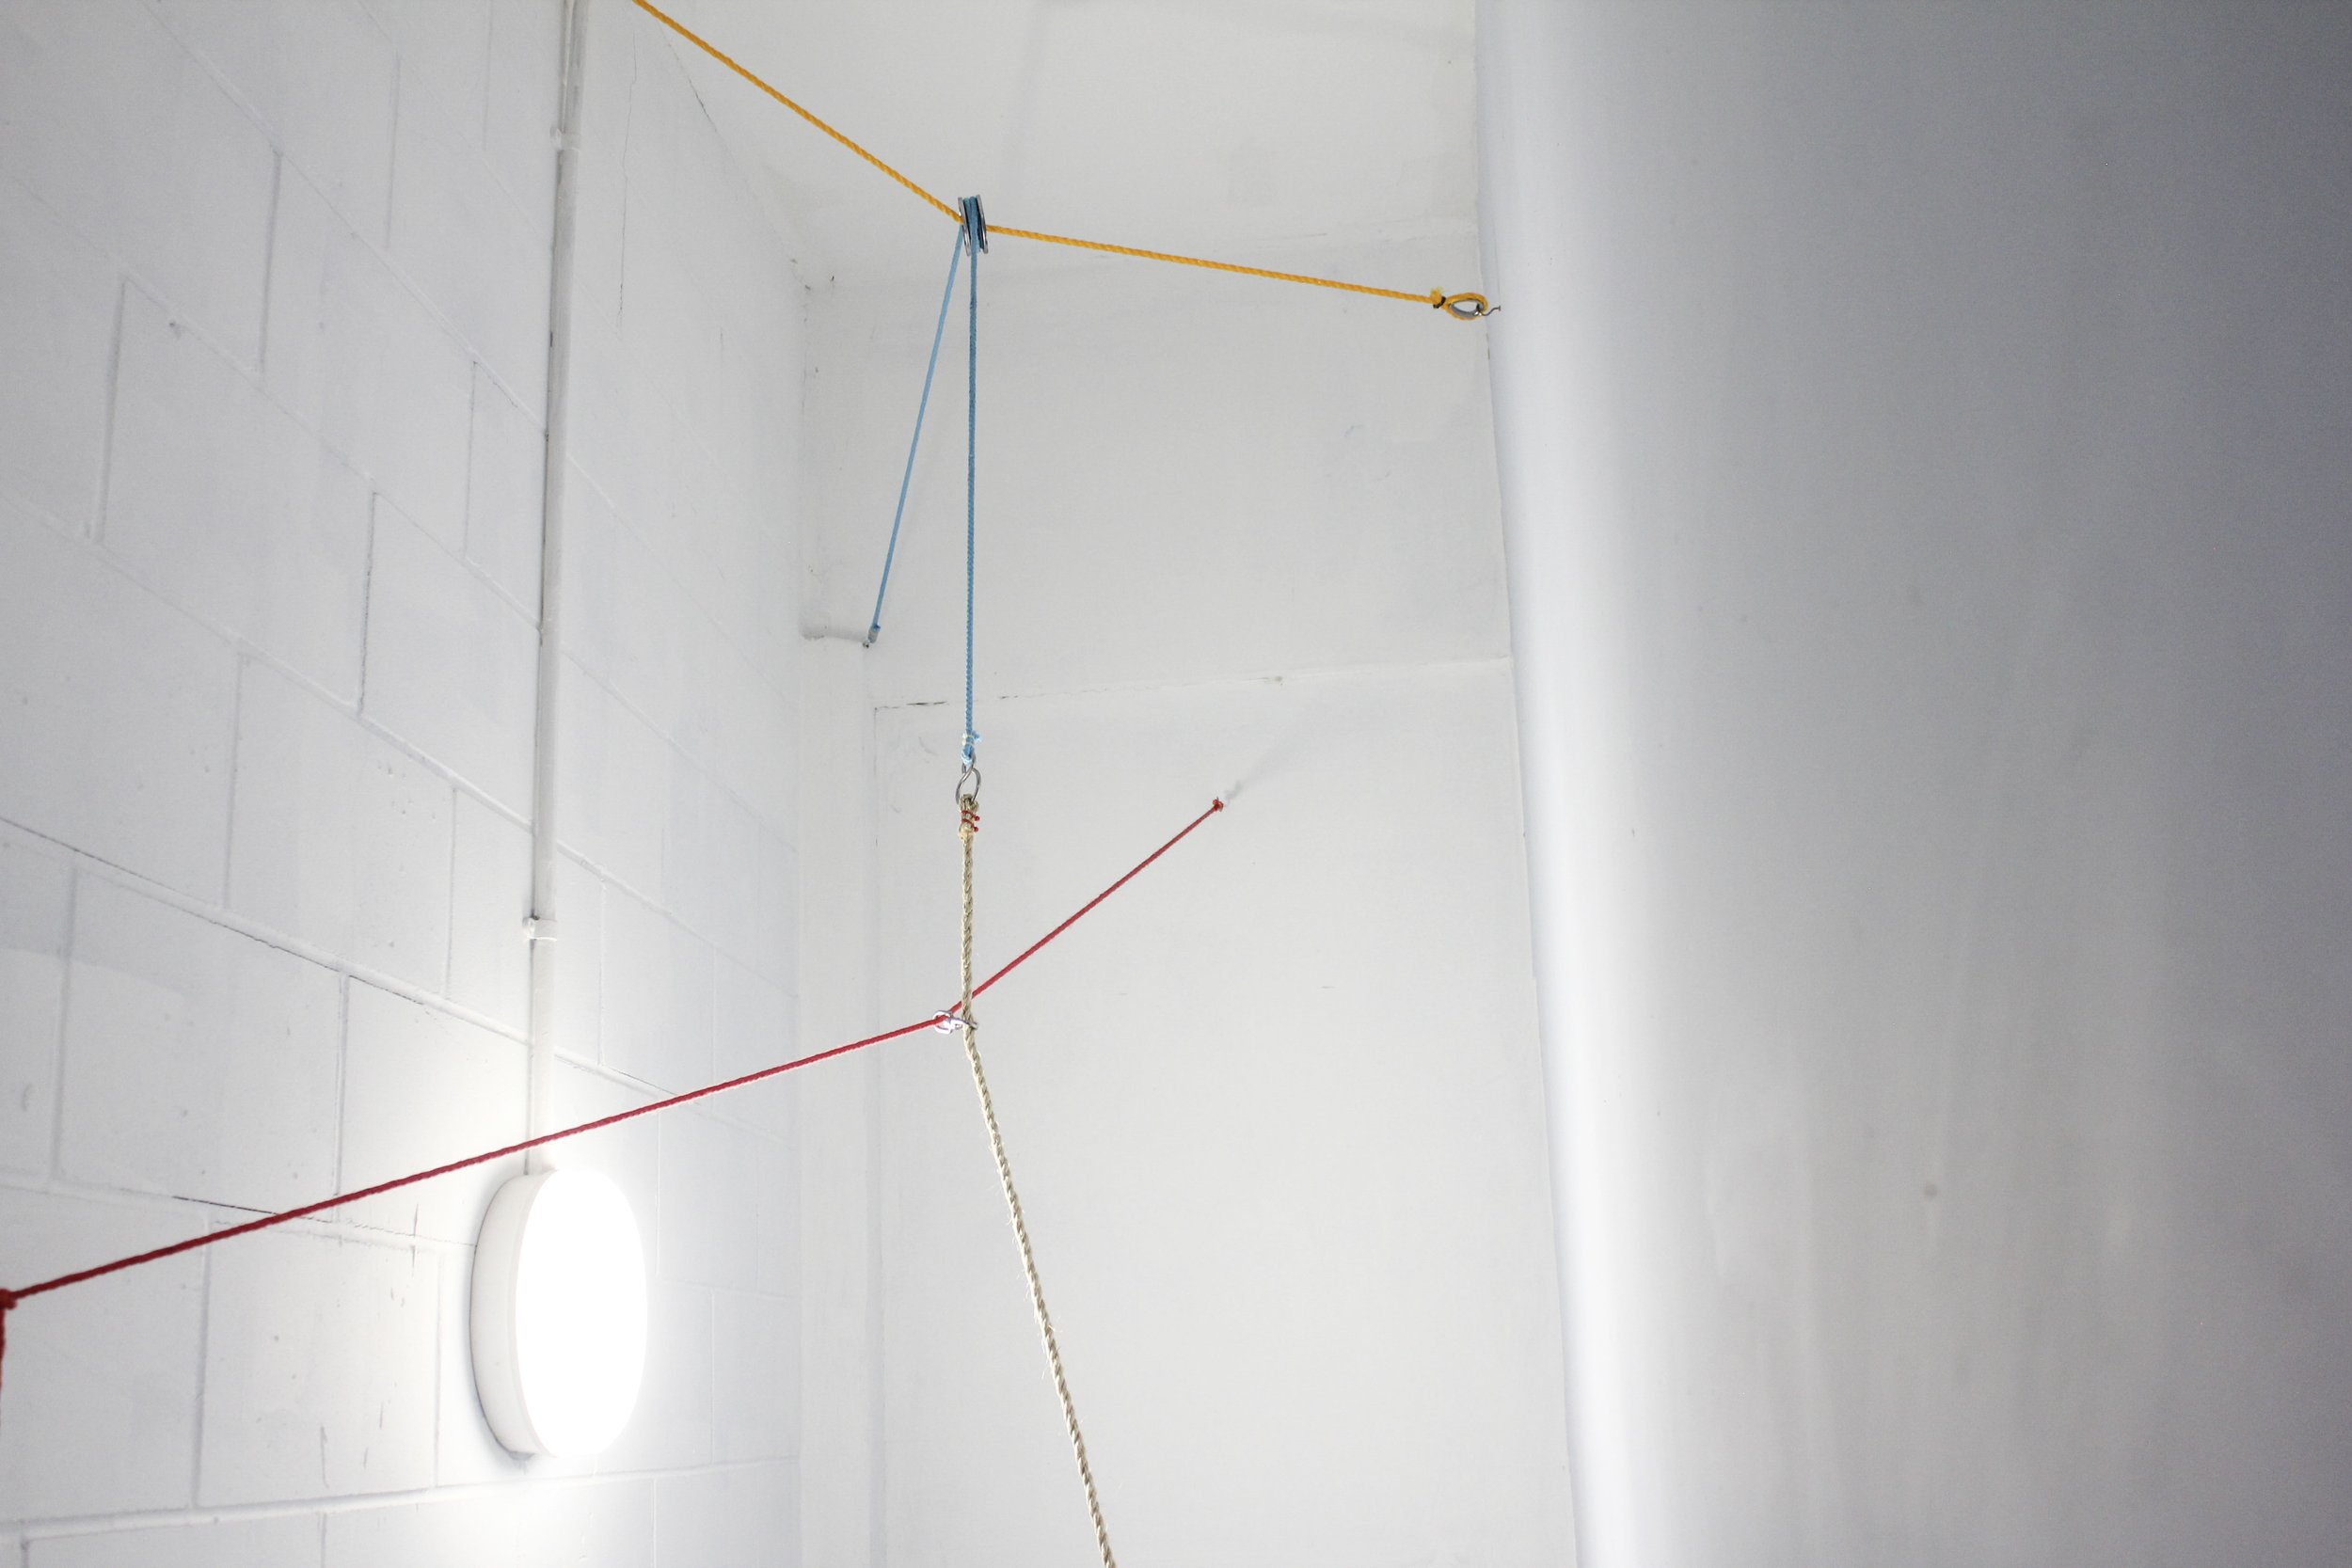 Rope In Action site specific installation by hardware archive